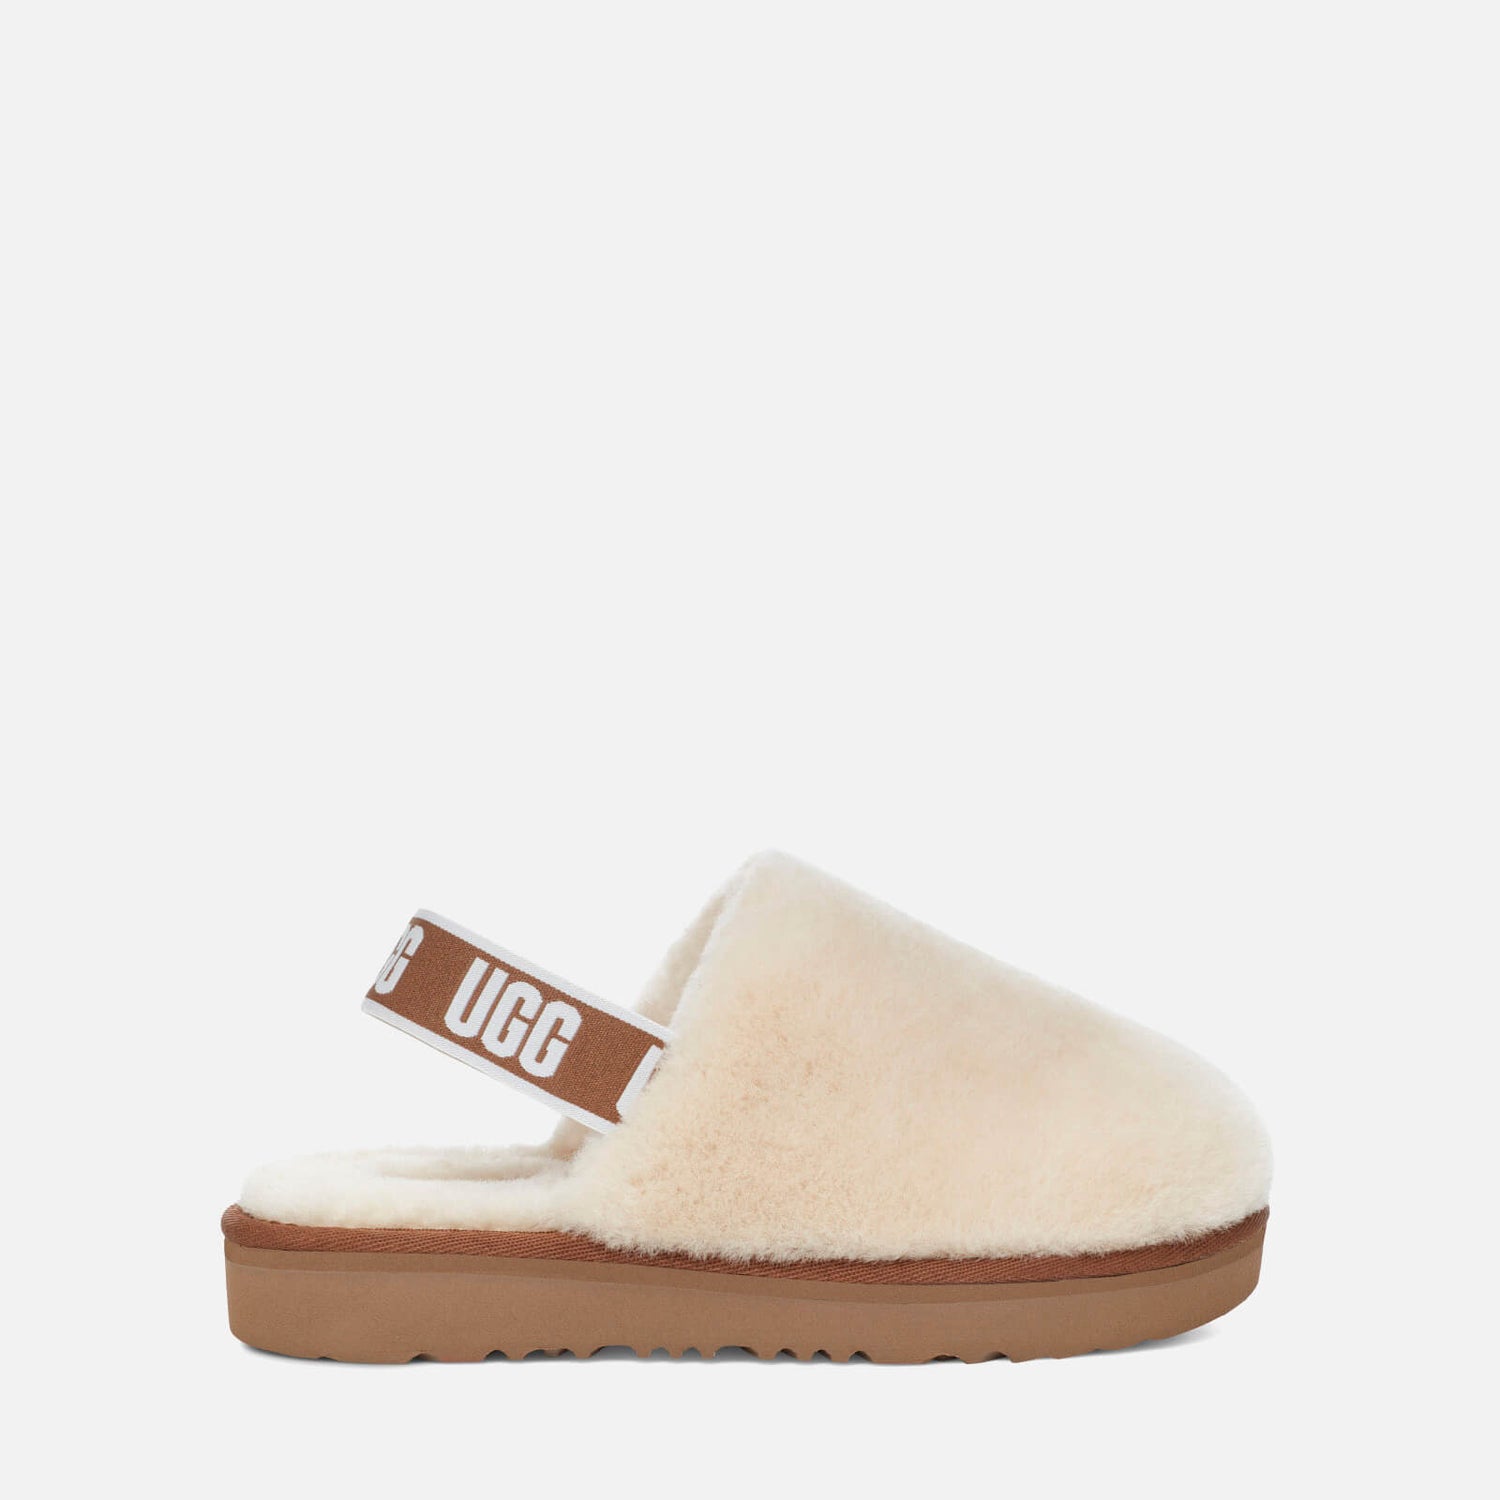 All Sole Boys Shoes Clogs Kids Fluff Yeah Clog Slippers 